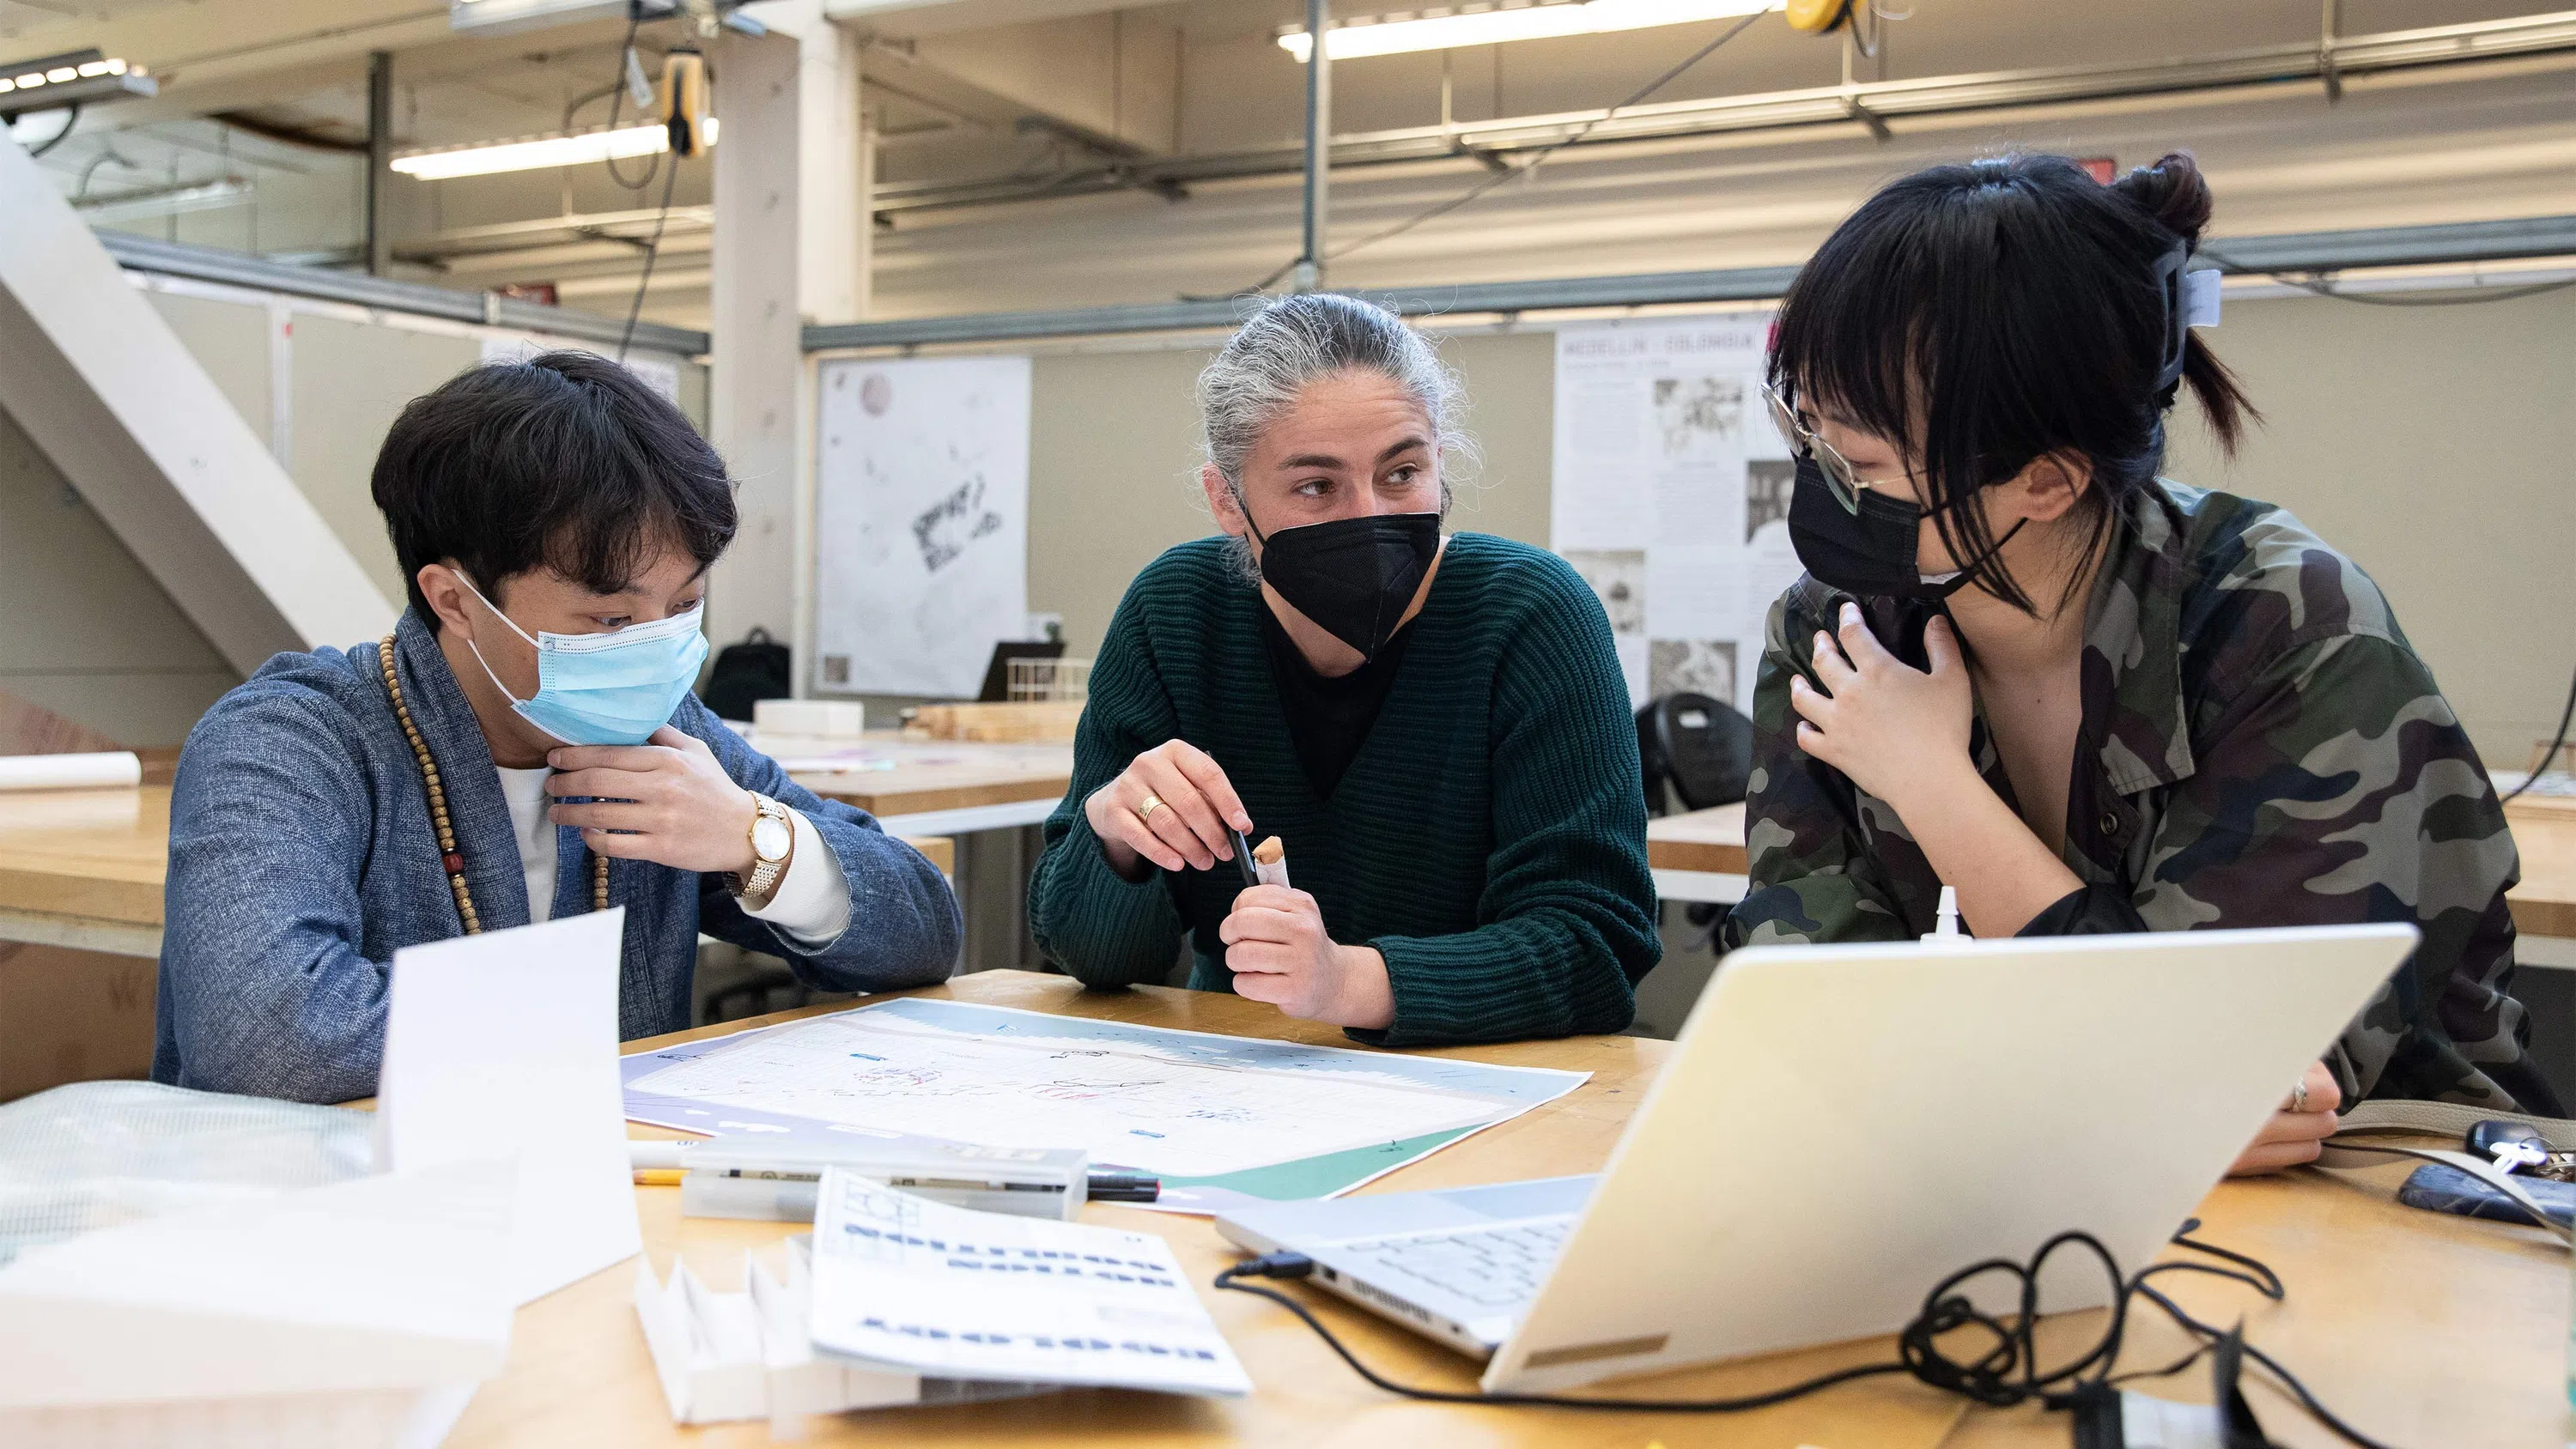 Two students look at an architectural drawing with a faculty member.